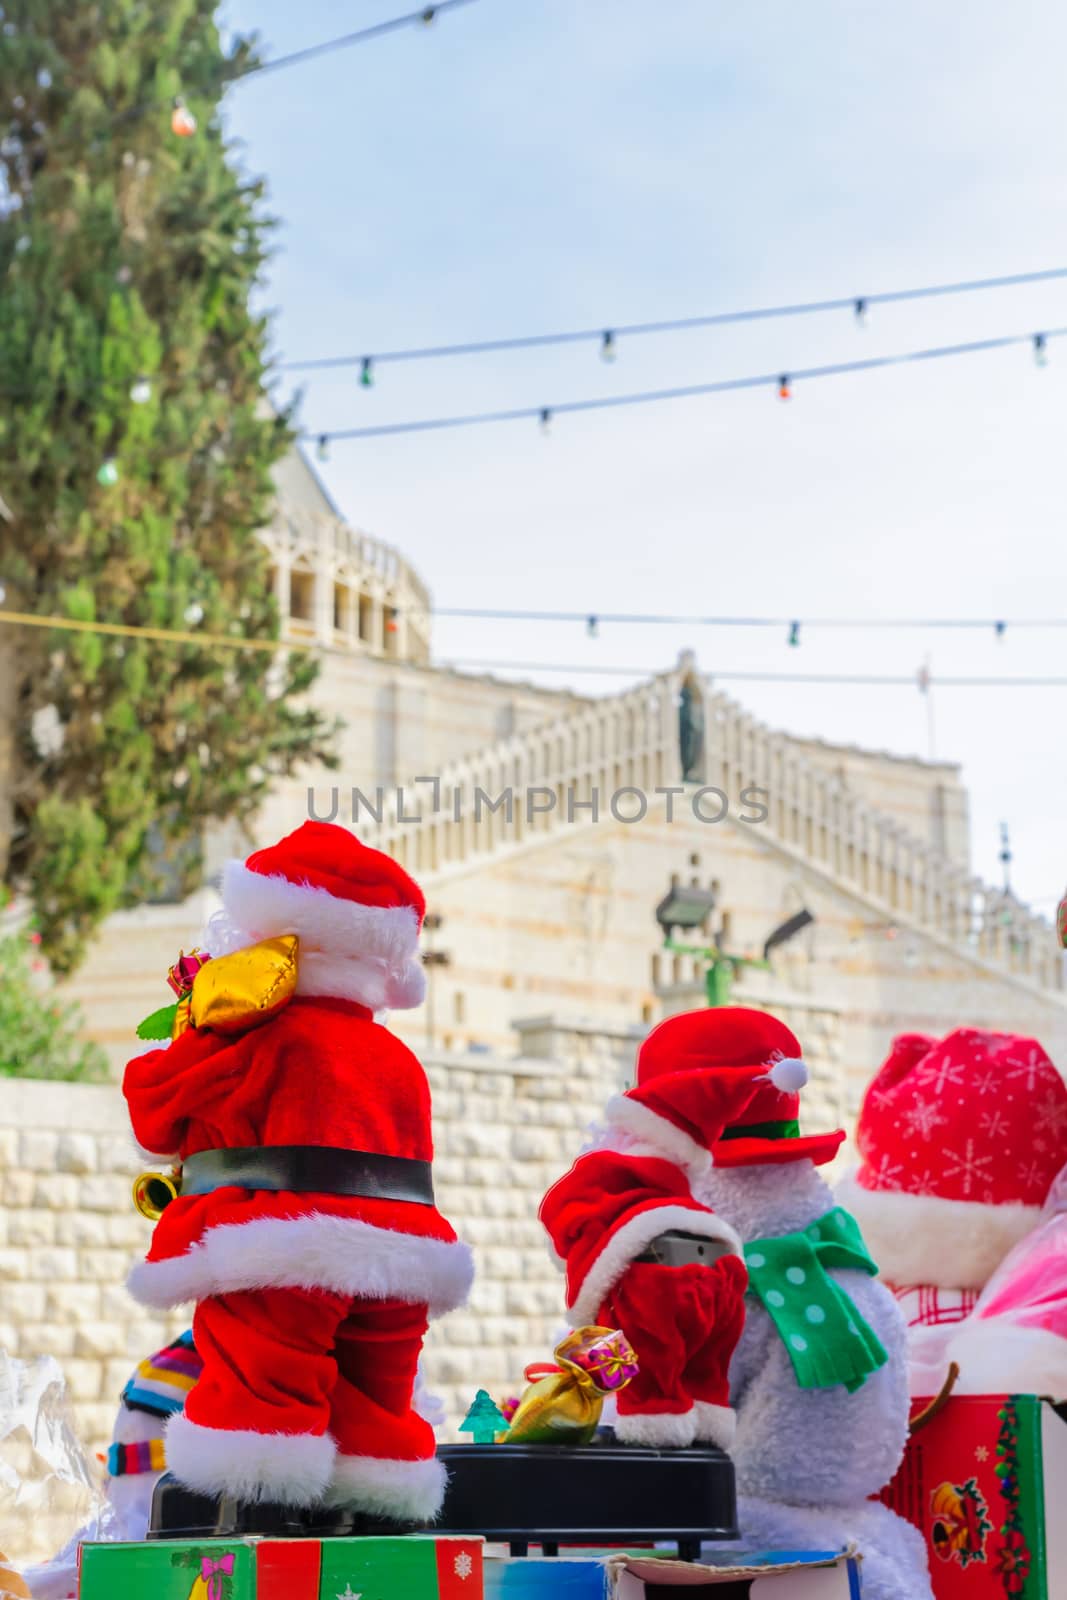 Santa Claus puppets on sale, with the Church of the Annunciation in the background, in Nazareth, Israel